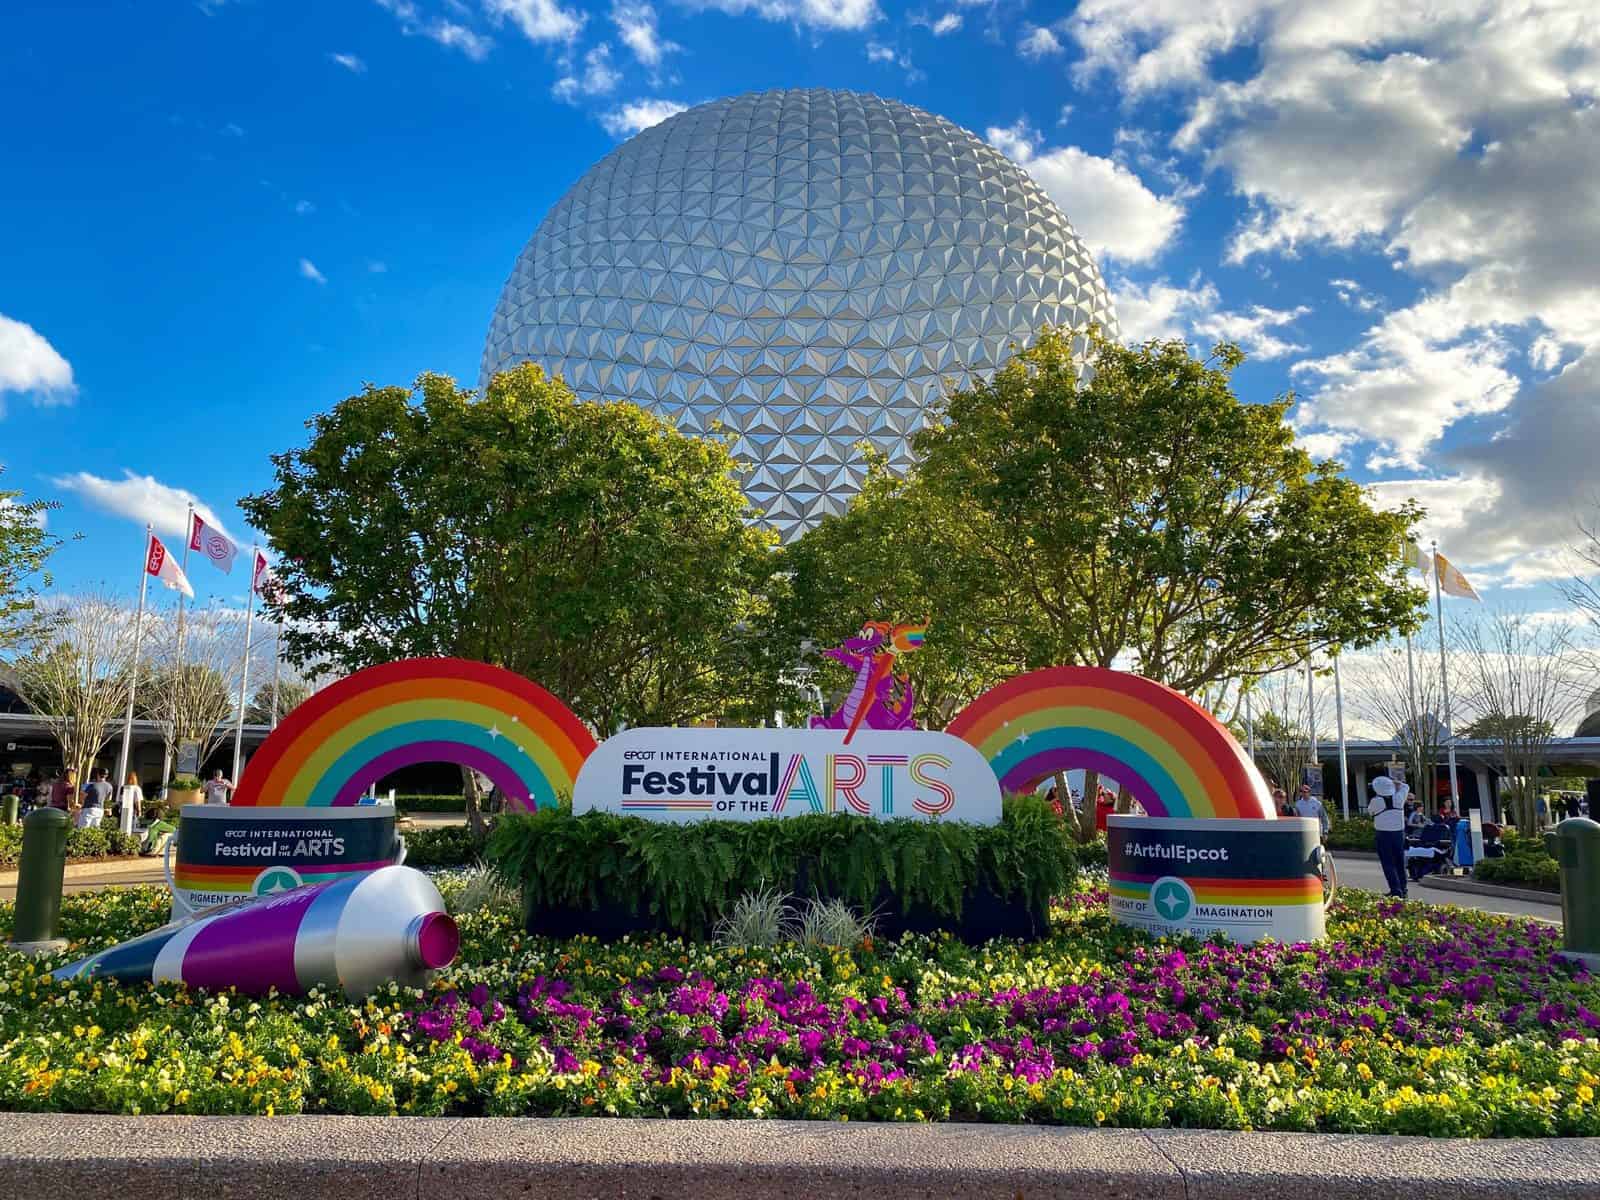 2023 Epcot International Festival of the Arts Dates Announced